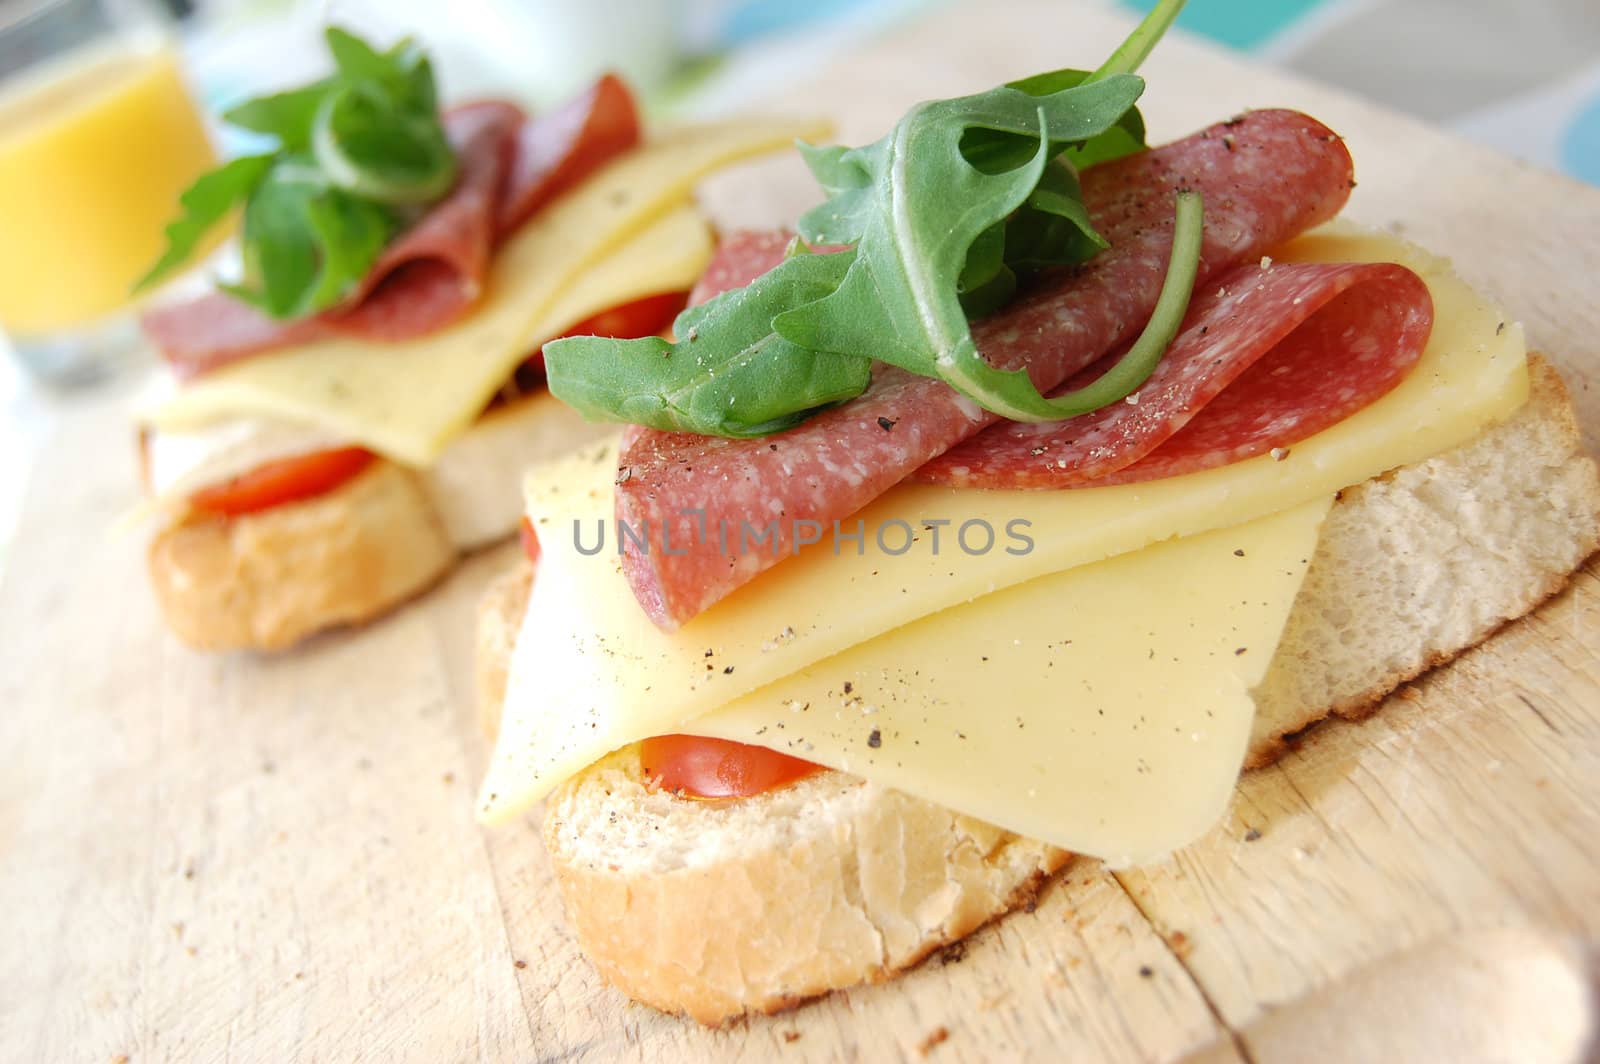 Delicious cheese and salami on toasted bread